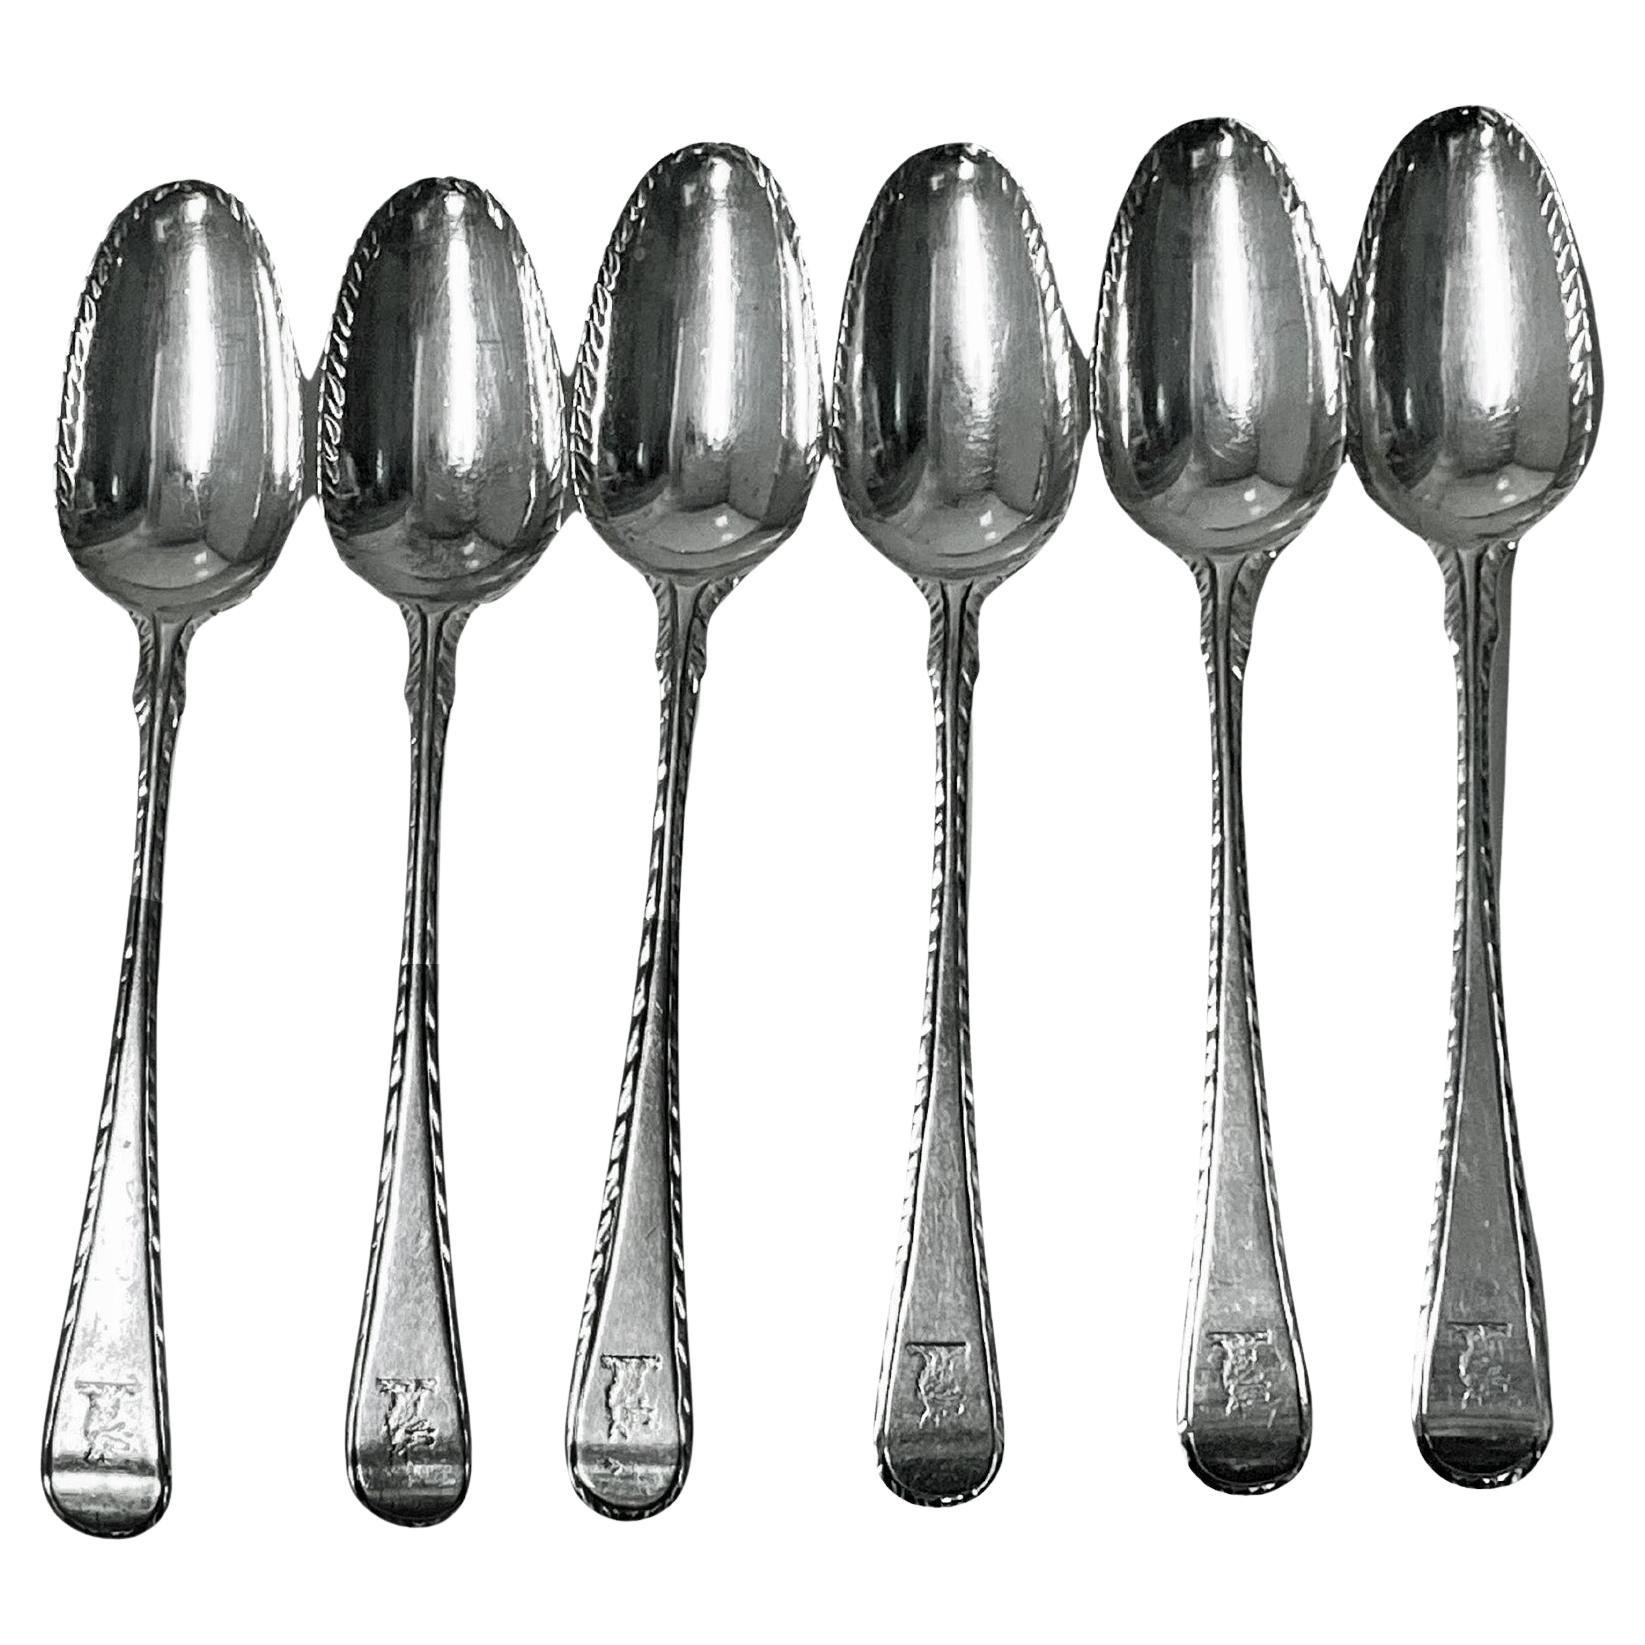 Georgian silver feather edge set of 6 teaspoons London circa 1770 Philip Roker. Each engraved with crest. Bowl edges also feather edge. Some marks stretched. Length: 5 inches. Weight: 86.49 grams.